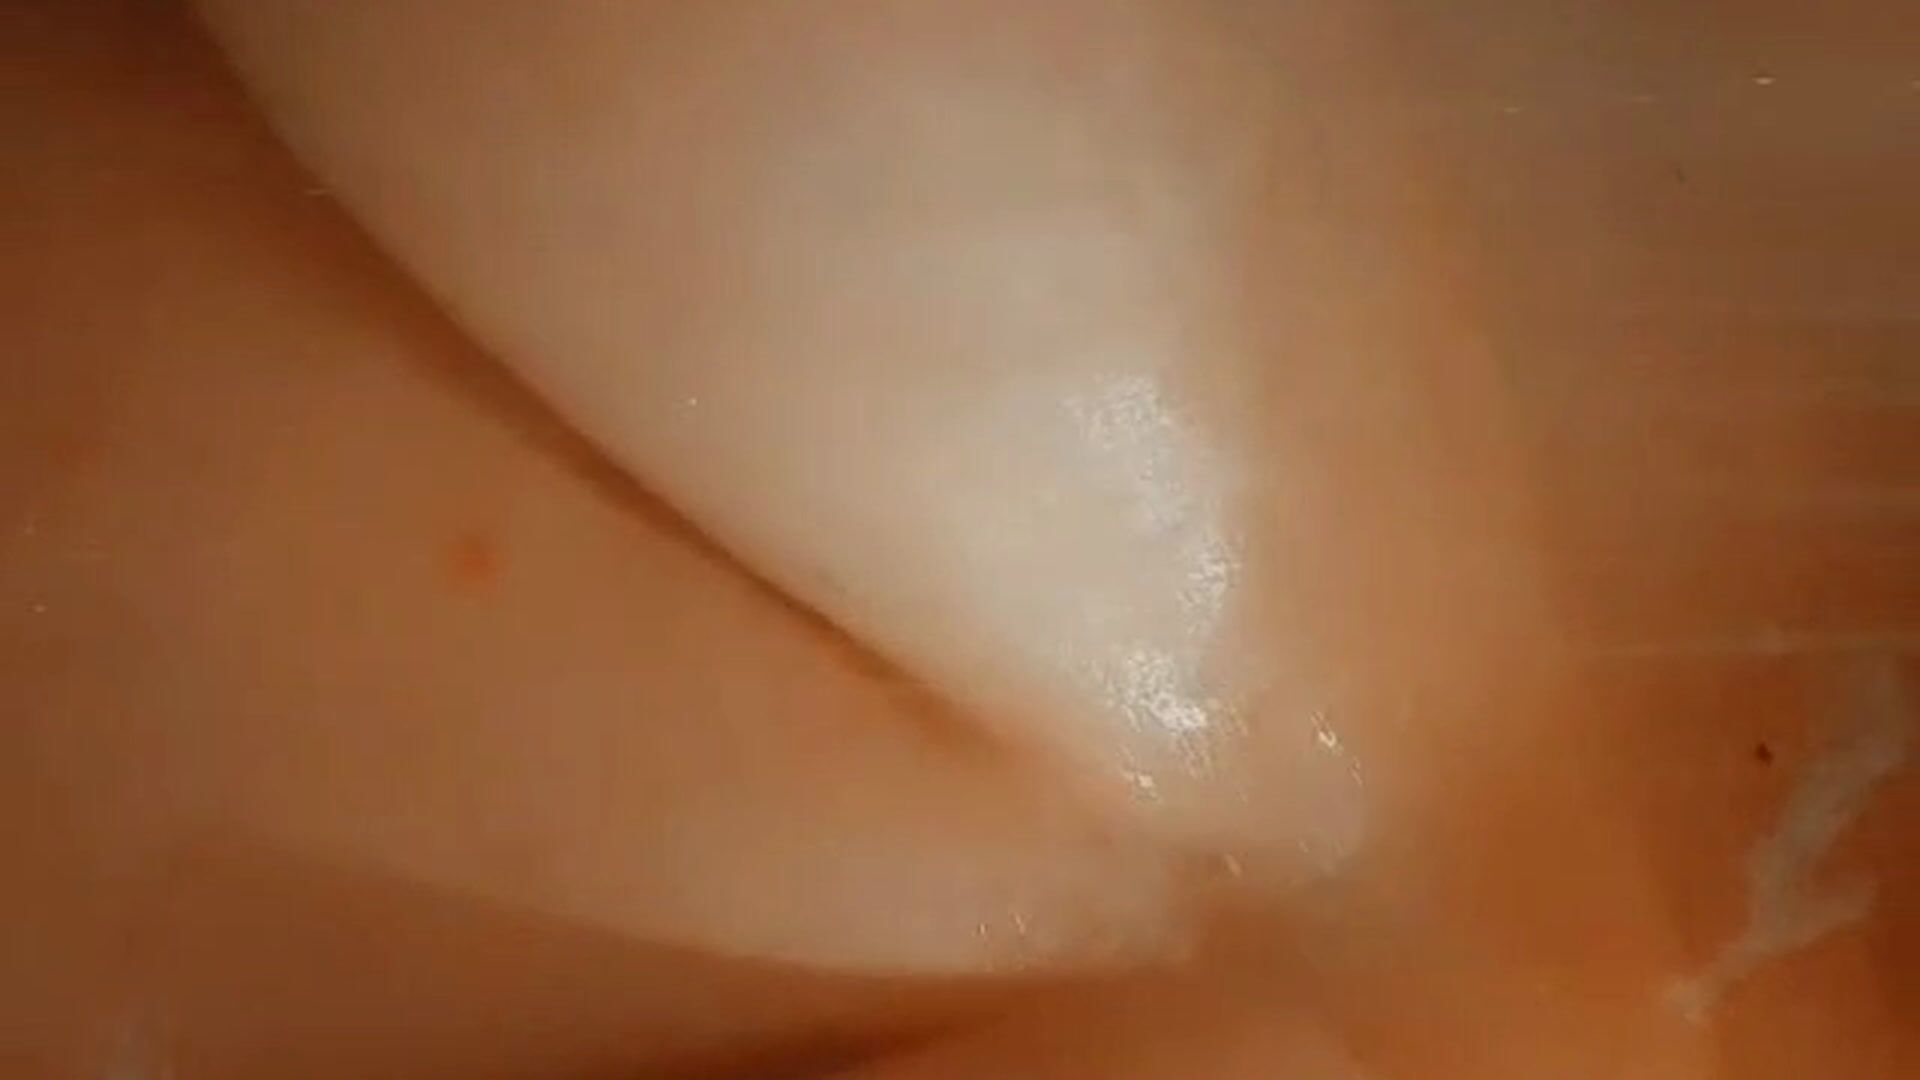 One time in shower - video by MommmyYummy cam model